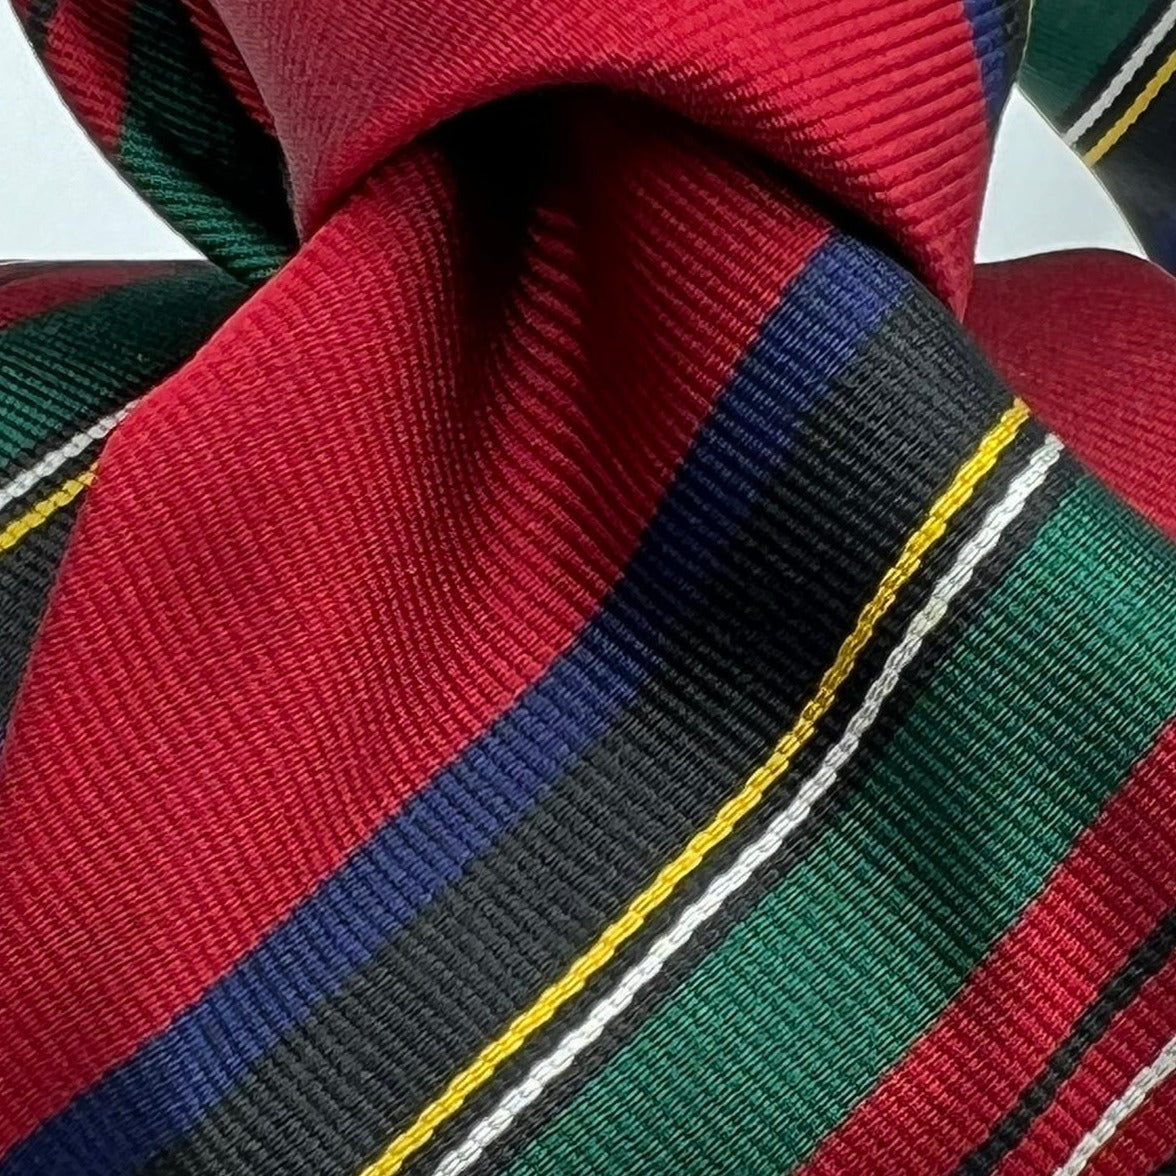 Drake's  100% Silk Tipped Red, Green, Blue and White  Stries Tie Handmade in England 8 cm x 148 cm #5326